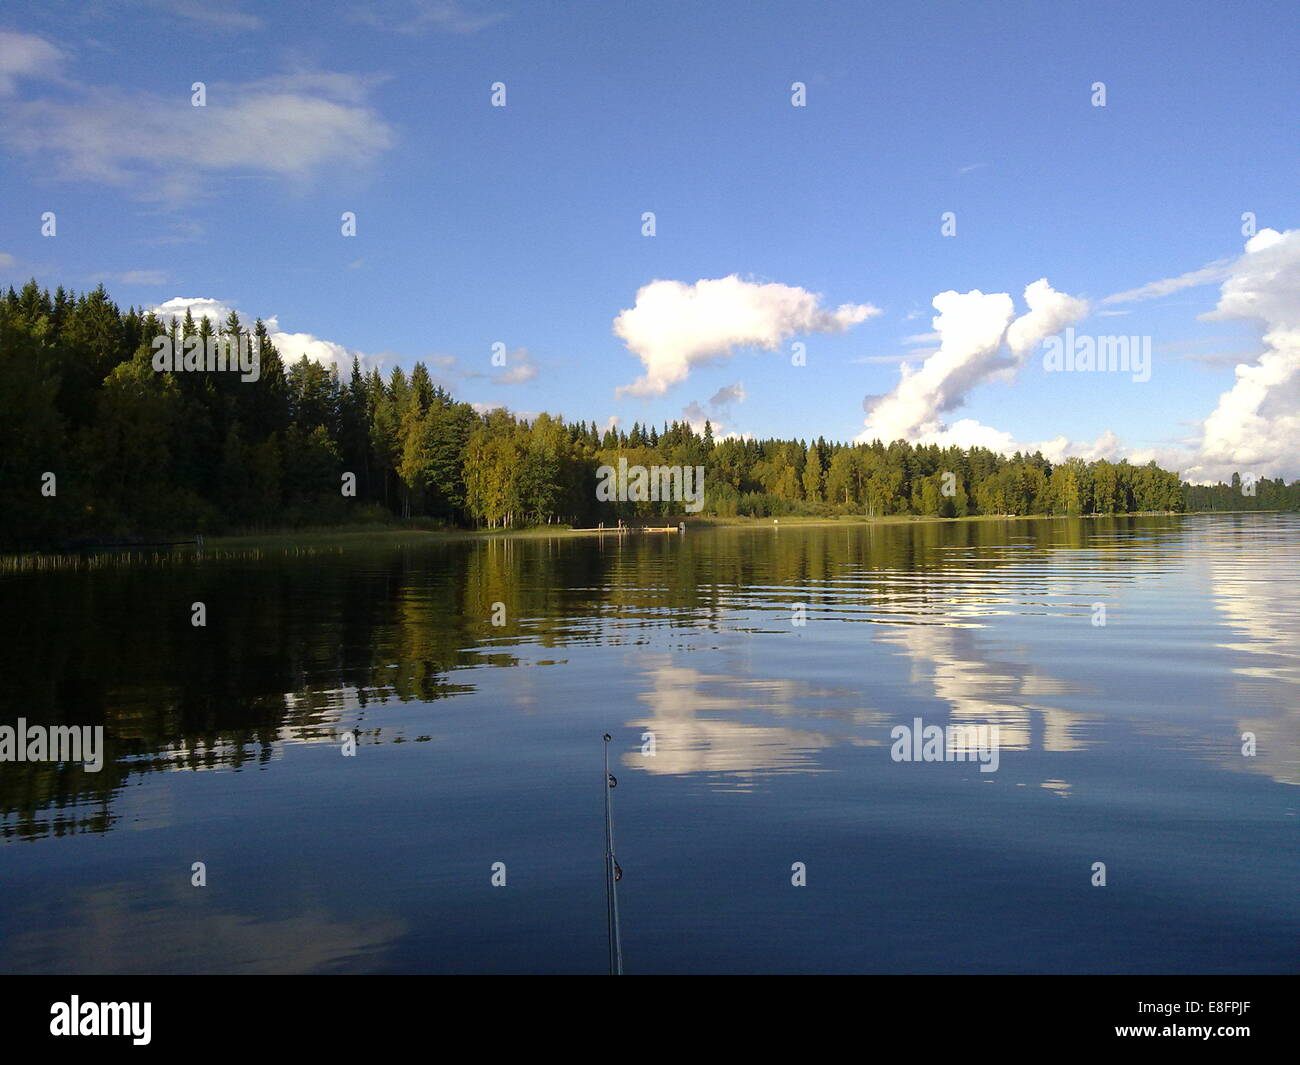 Finland, Proper, Scenic landscape with Paajarvi lake and fishing rod in foreground Stock Photo